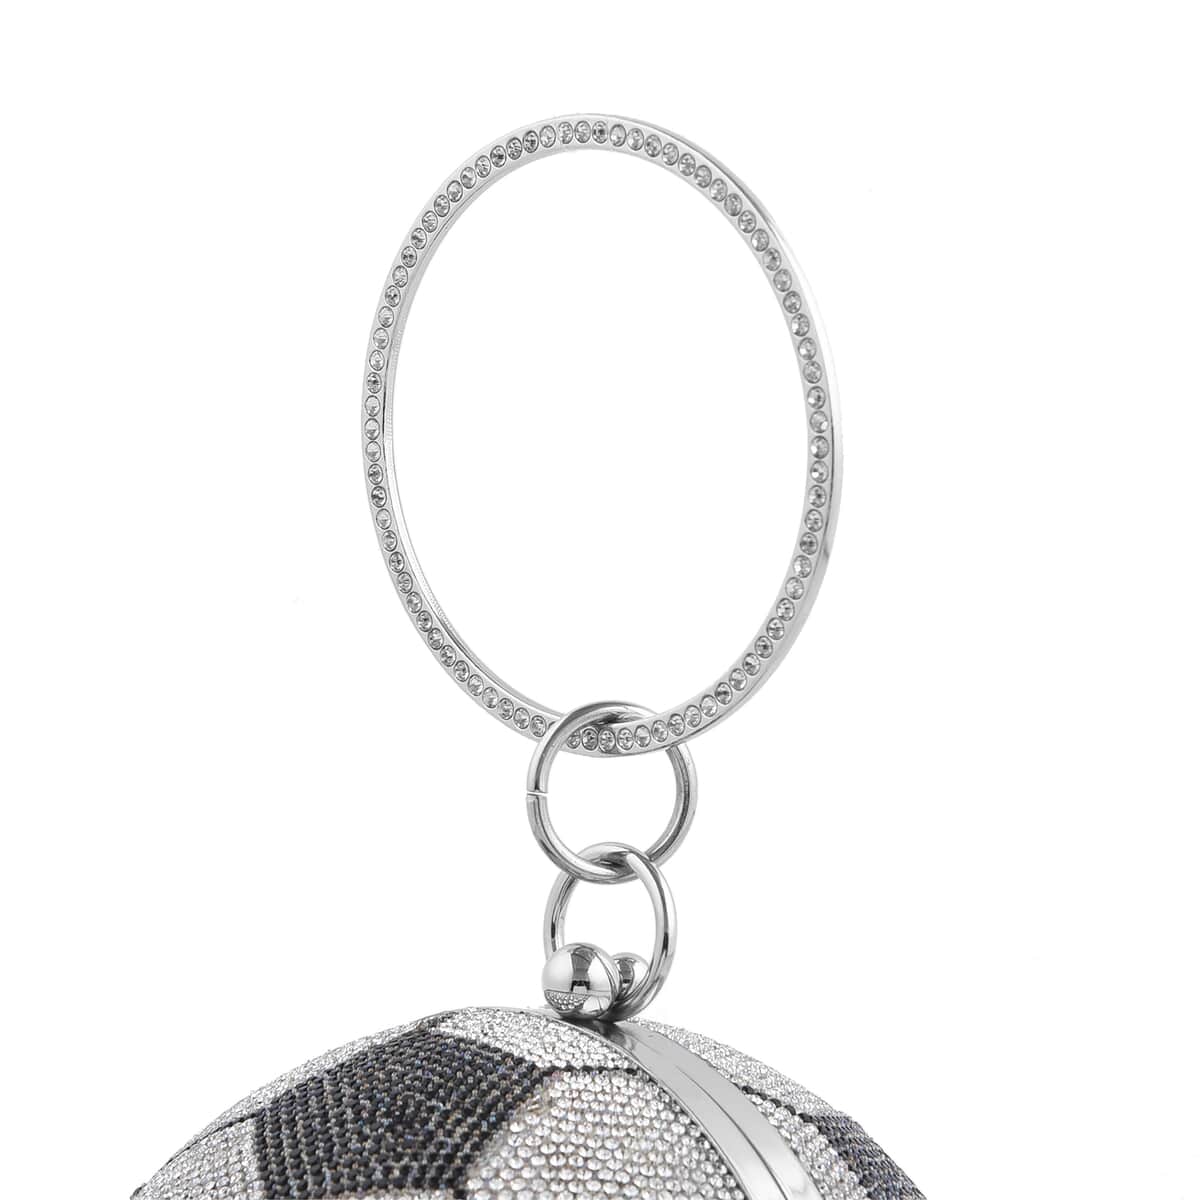 Black & White Crystal Basketball Shape Clutch Bag (D 5.5") wih Chain (47") and Hand Drop (3.25") image number 5